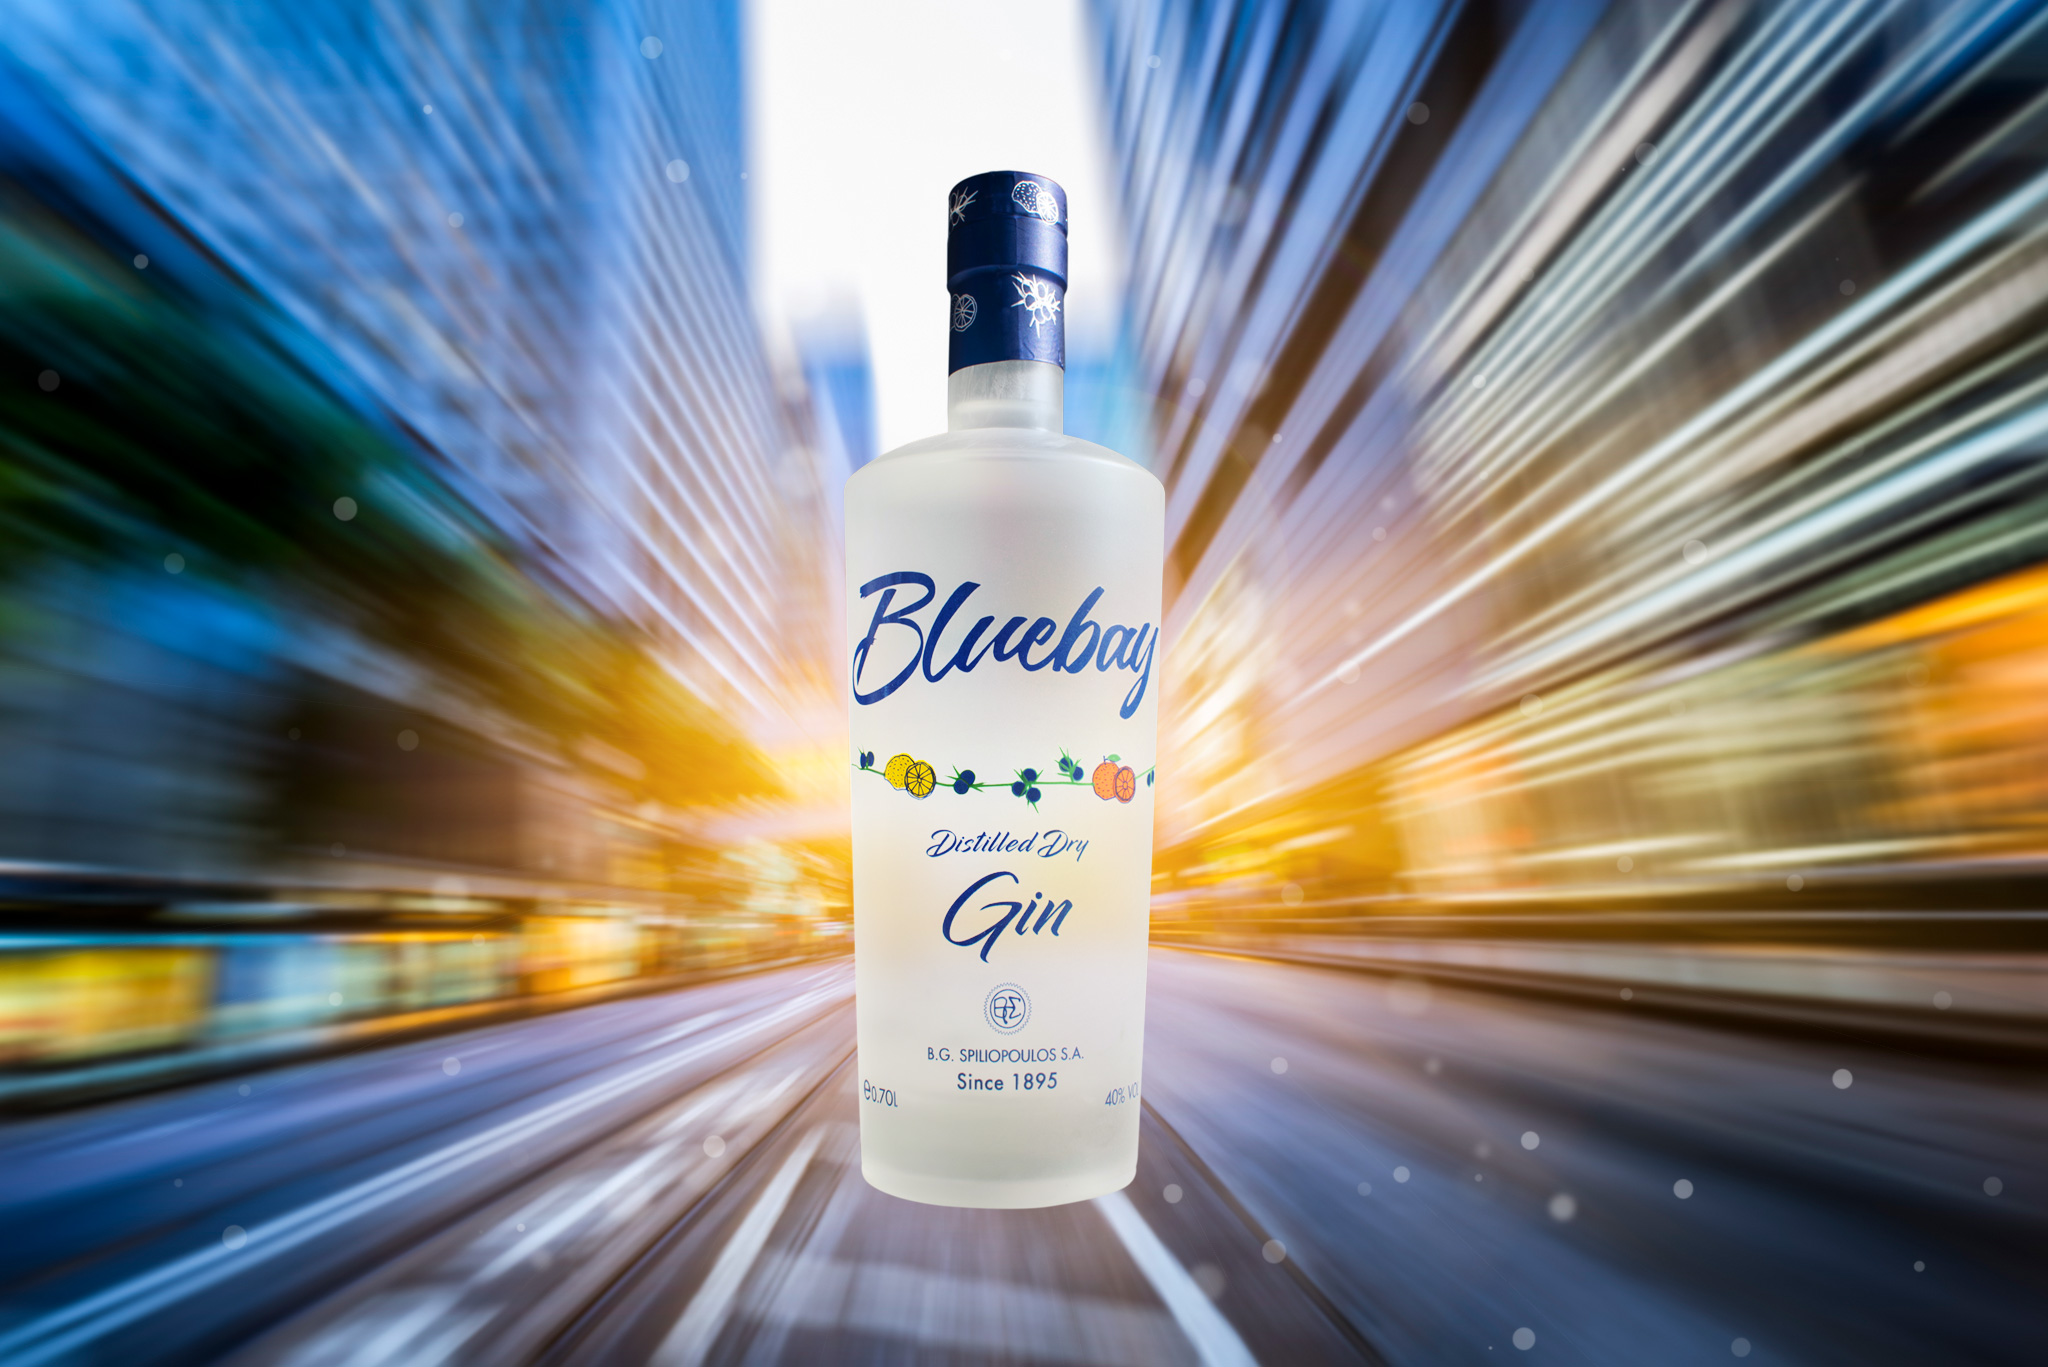  Take a pause with a sip of Bluebay.